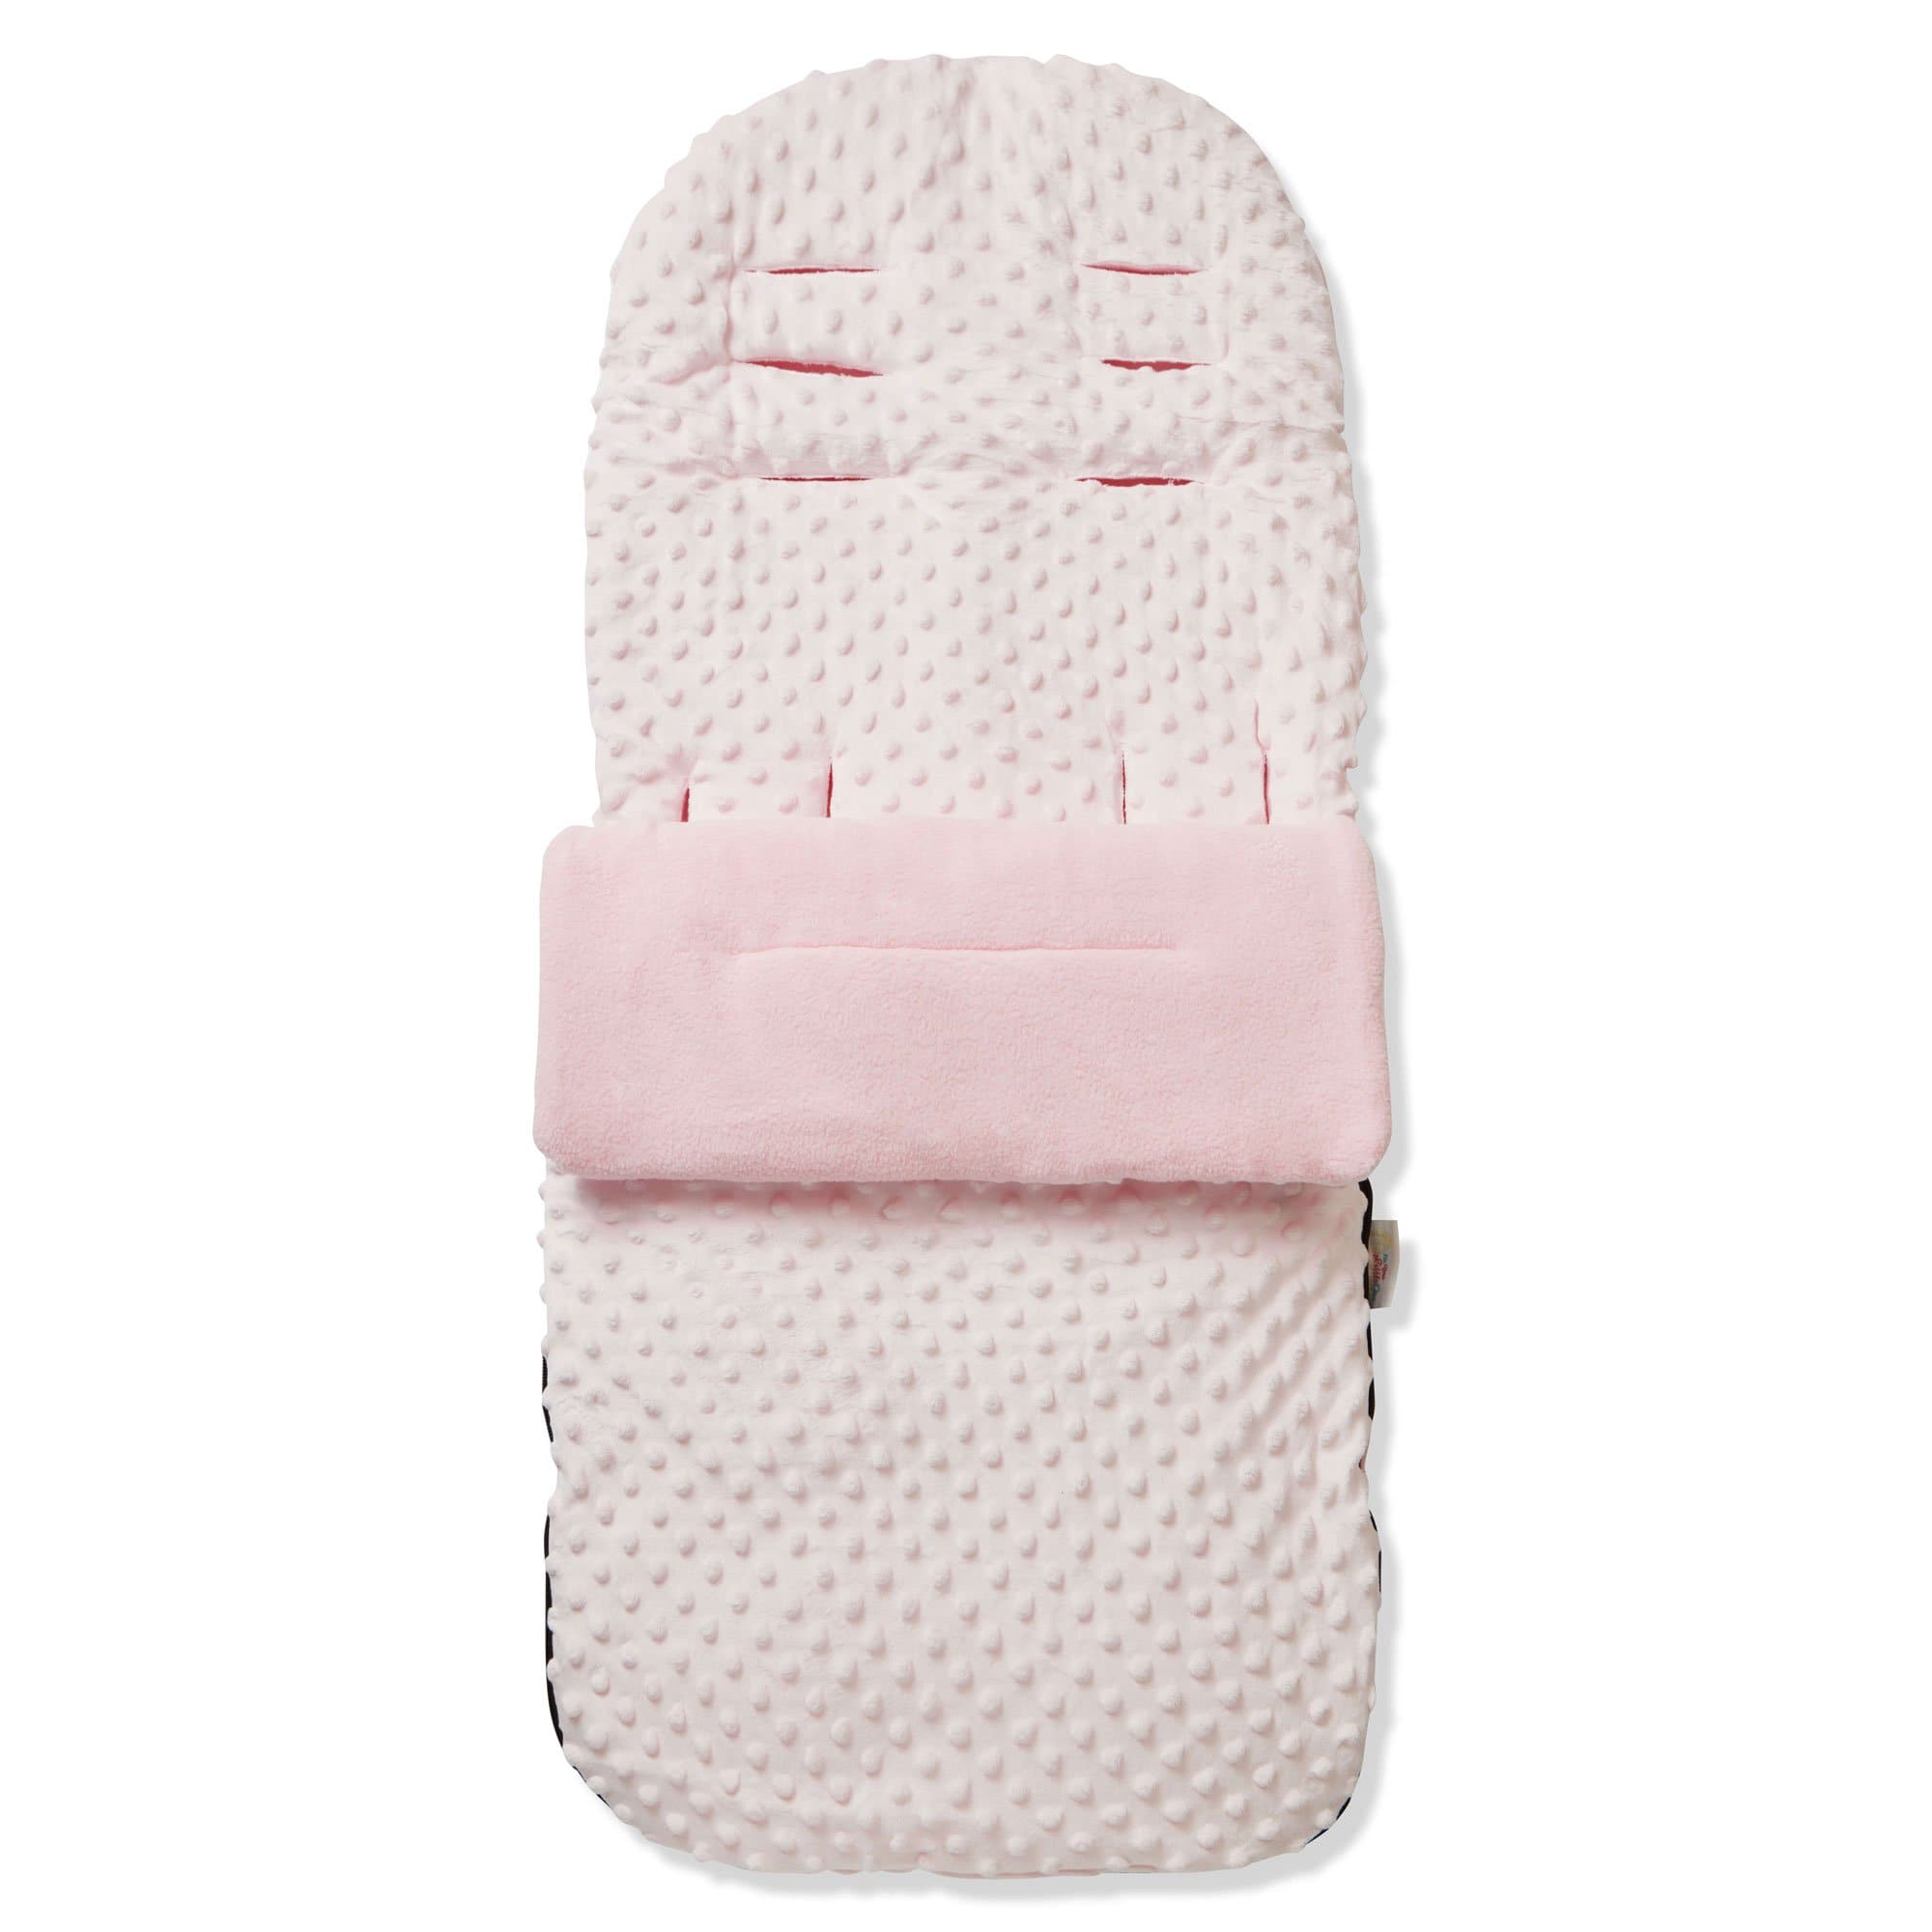 Dimple Footmuff / Cosy Toes Compatible with Jane - For Your Little One